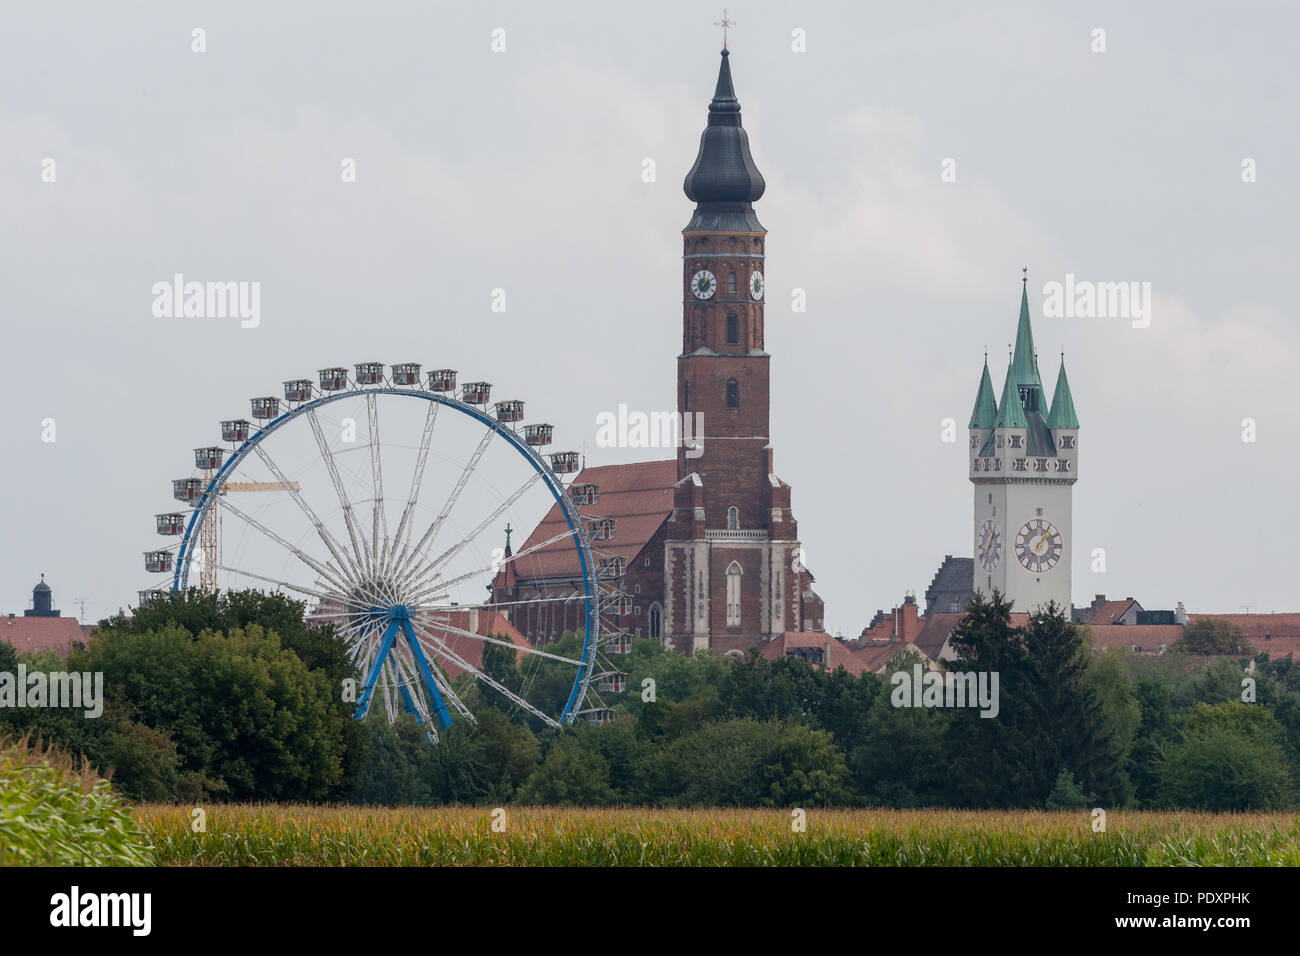 Straubing, Germany. 11th Aug, 2018. The Ferris wheel of the Gaeuboden Folk Festival stands in front of the city scenery with the water tower of the Basilica St. Jakob and the city tower. Credit: Armin Weigel/dpa/Alamy Live News Stock Photo